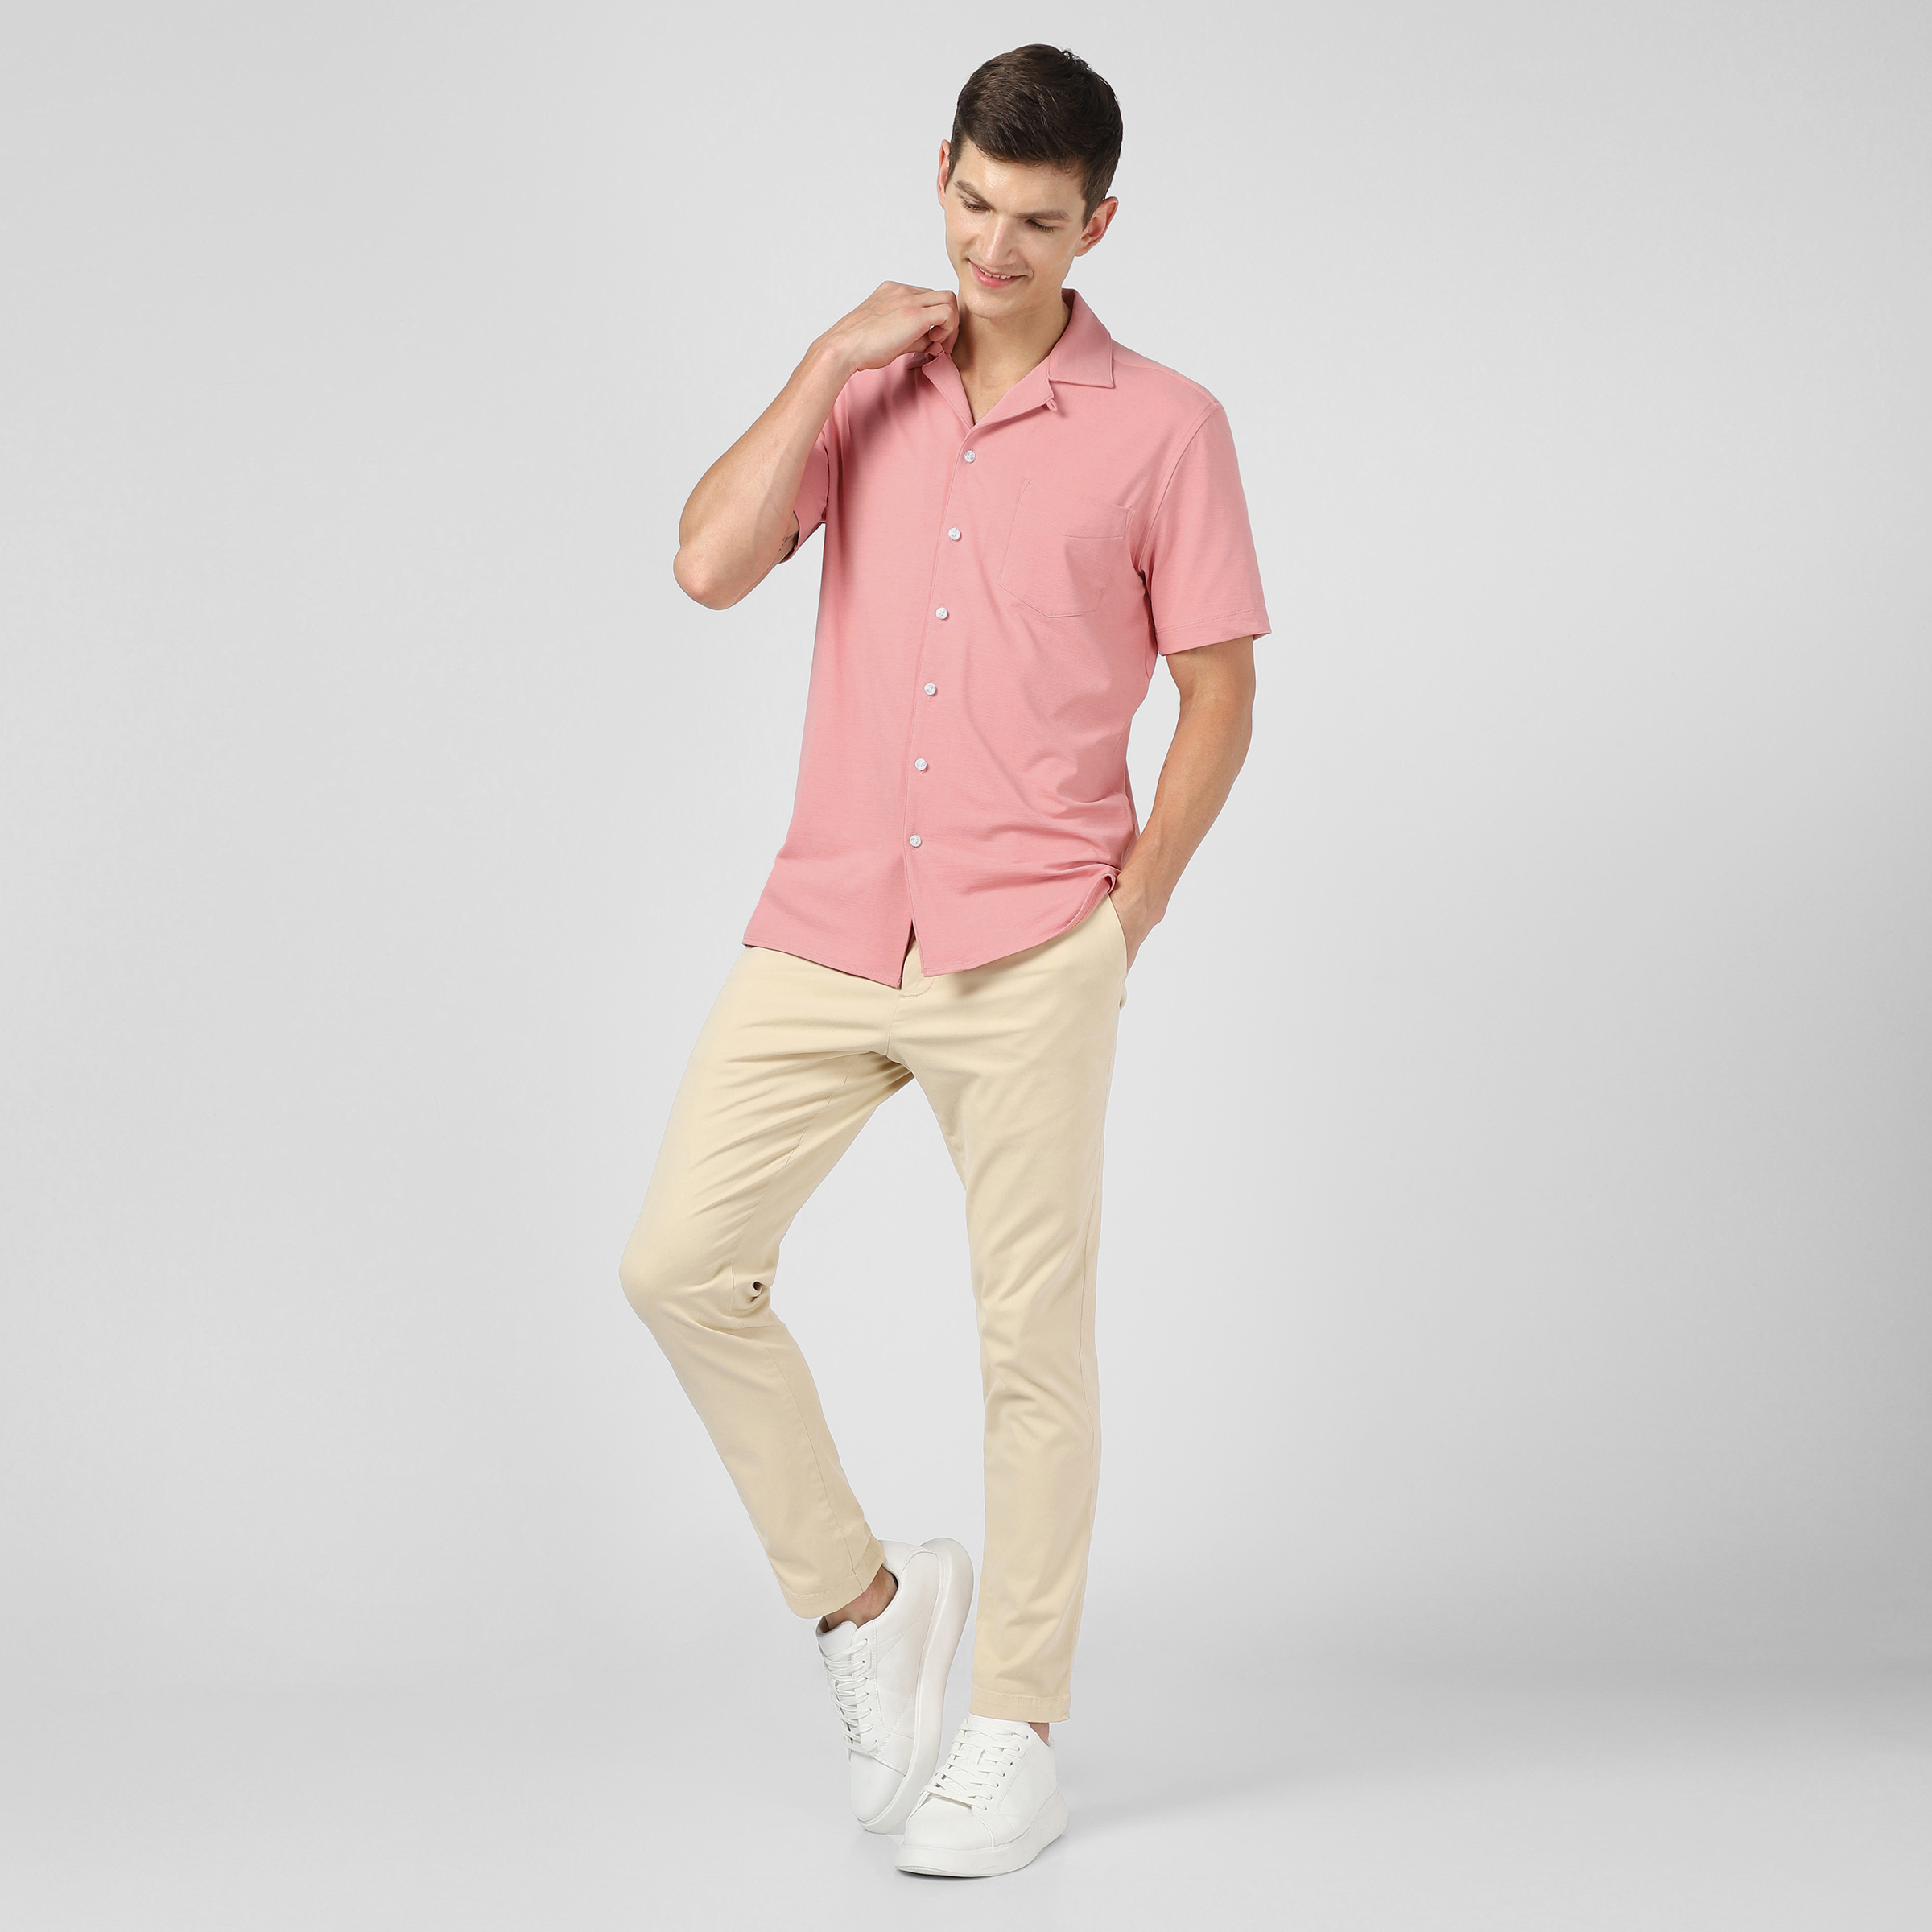  Villa Camp Collar Shirt Peach full body on model worn with Stretch Chino Pant Sand Dune